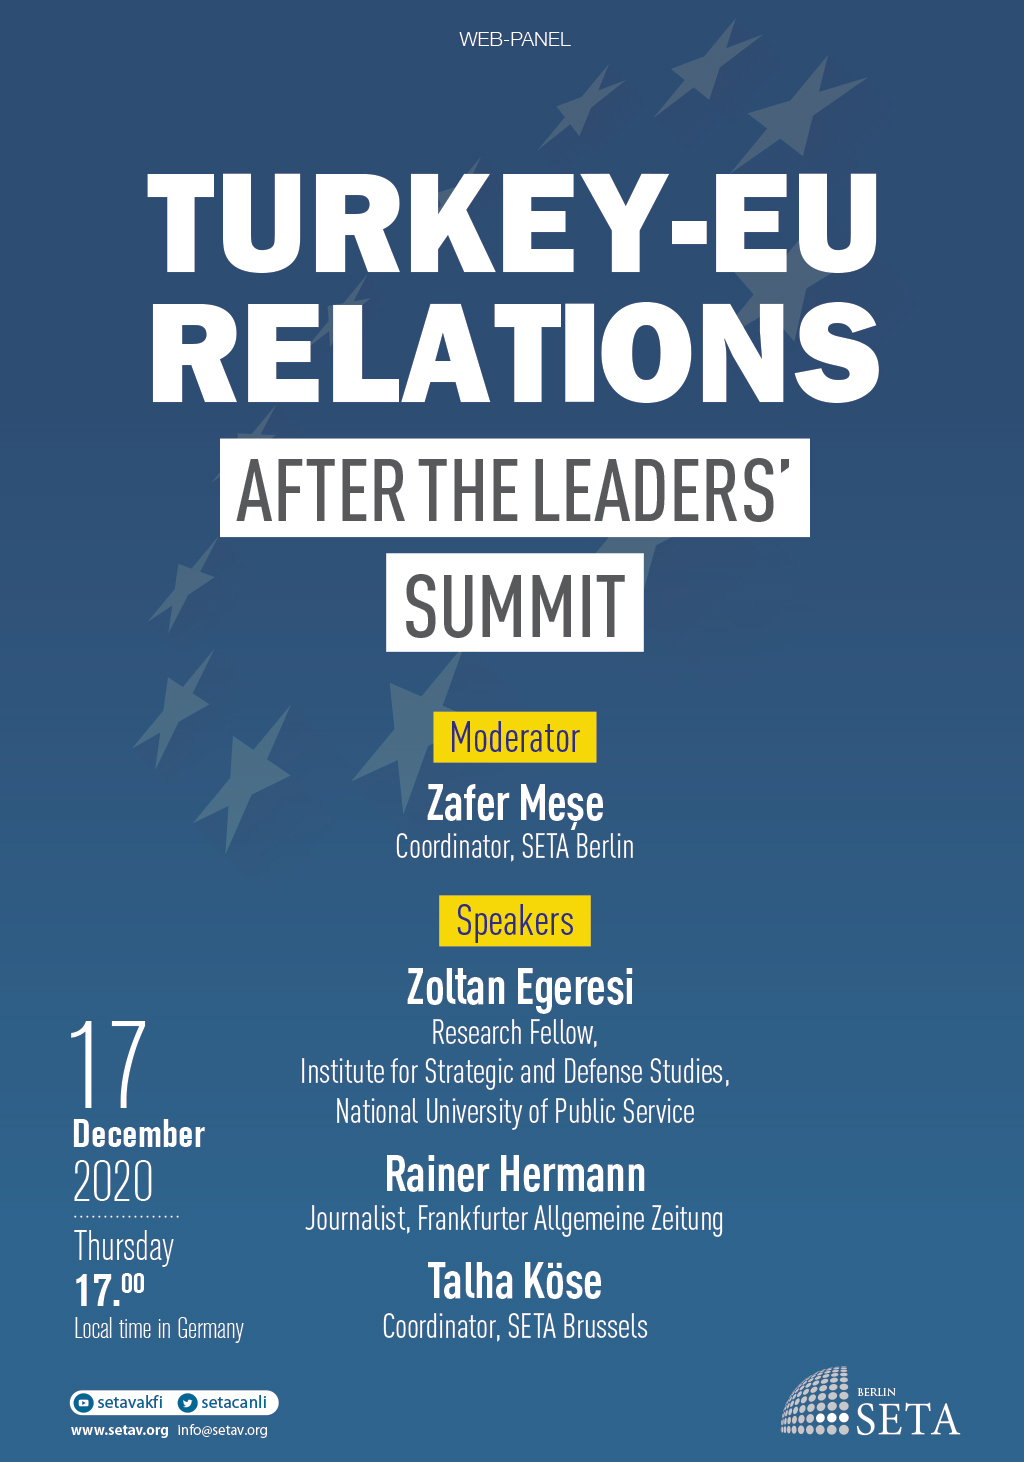 Turkey-EU Relations After the Leaders Summit